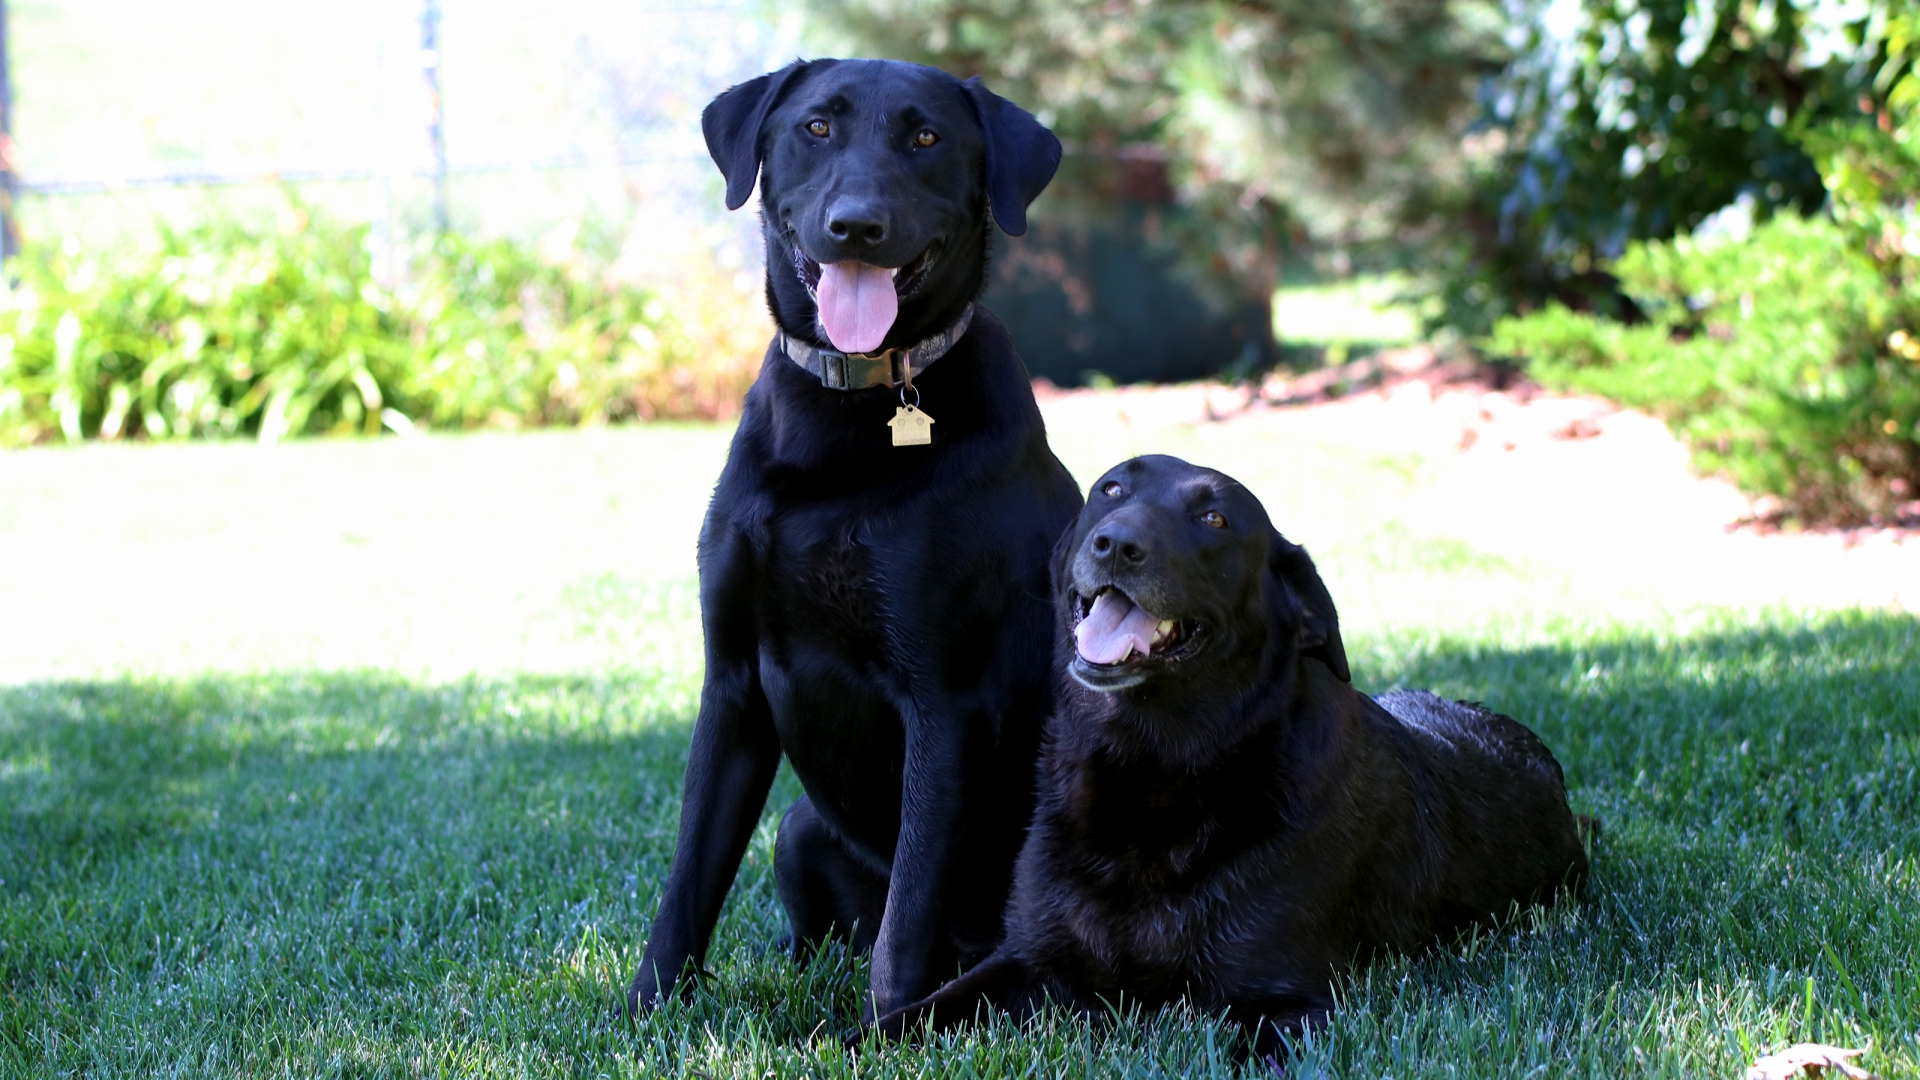 two dogs sitting down in grass.